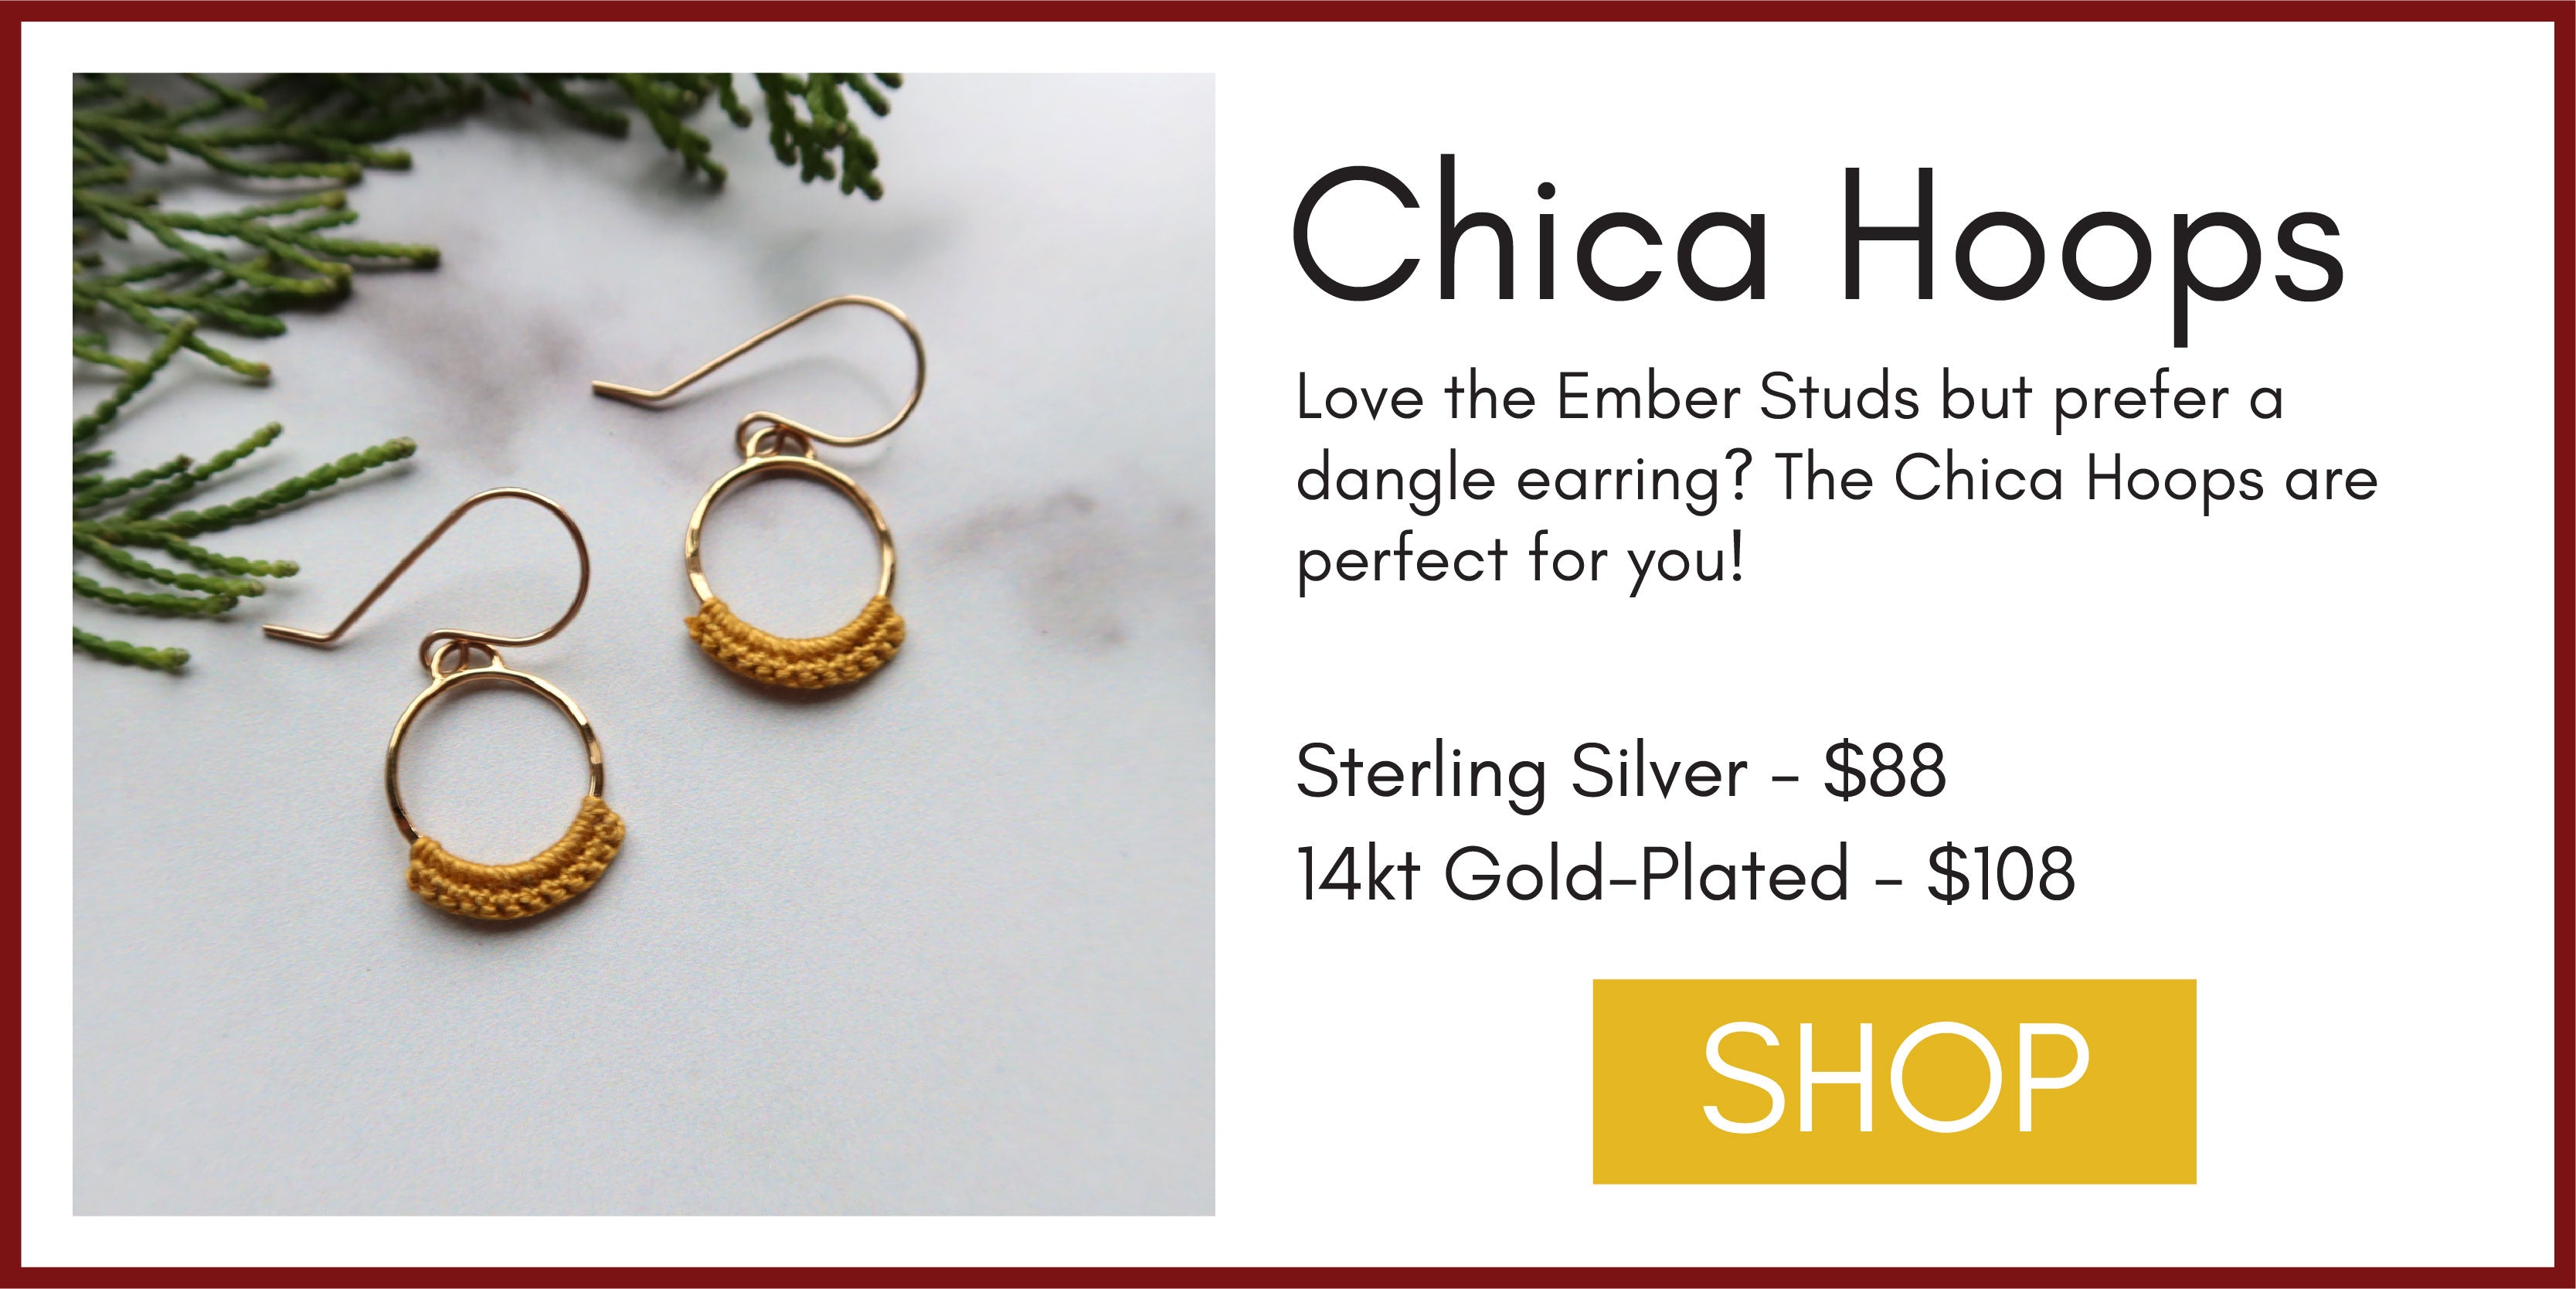 Graphic with title "Chica Hoops" and an image that shows the Chica Hoops in Mustard with holiday greenery in the background